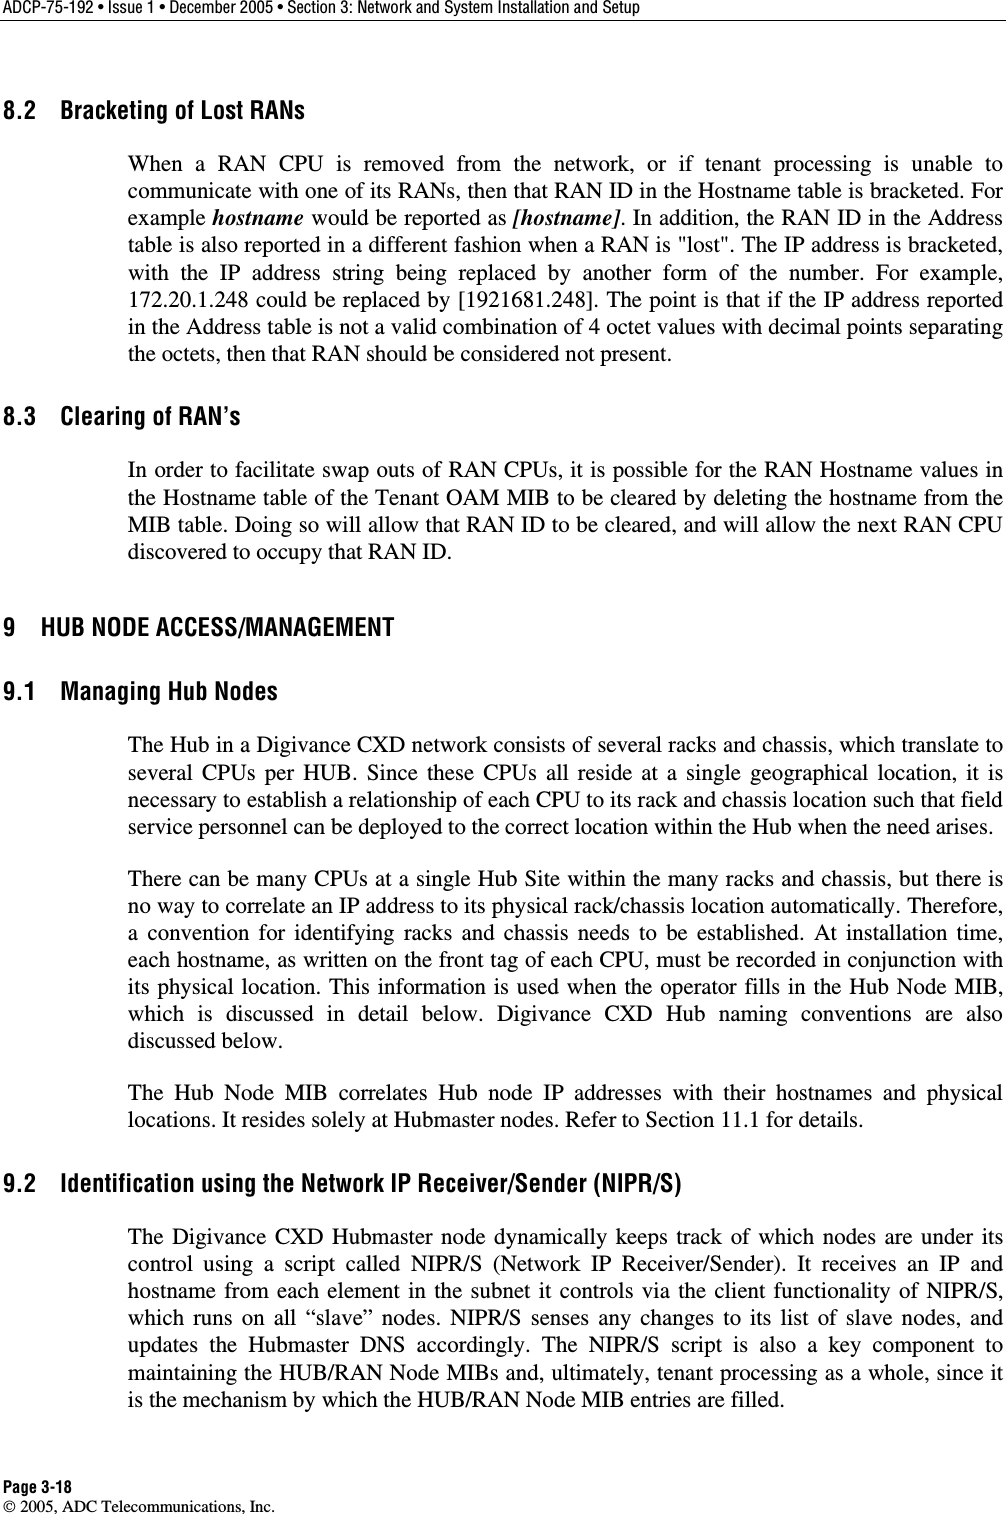 ADCP-75-192 • Issue 1 • December 2005 • Section 3: Network and System Installation and Setup Page 3-18  2005, ADC Telecommunications, Inc. 8.2  Bracketing of Lost RANs When a RAN CPU is removed from the network, or if tenant processing is unable to communicate with one of its RANs, then that RAN ID in the Hostname table is bracketed. For example hostname would be reported as [hostname]. In addition, the RAN ID in the Address table is also reported in a different fashion when a RAN is &quot;lost&quot;. The IP address is bracketed, with the IP address string being replaced by another form of the number. For example, 172.20.1.248 could be replaced by [1921681.248]. The point is that if the IP address reported in the Address table is not a valid combination of 4 octet values with decimal points separating the octets, then that RAN should be considered not present. 8.3  Clearing of RAN’s In order to facilitate swap outs of RAN CPUs, it is possible for the RAN Hostname values in the Hostname table of the Tenant OAM MIB to be cleared by deleting the hostname from the MIB table. Doing so will allow that RAN ID to be cleared, and will allow the next RAN CPU discovered to occupy that RAN ID. 9  HUB NODE ACCESS/MANAGEMENT 9.1  Managing Hub Nodes The Hub in a Digivance CXD network consists of several racks and chassis, which translate to several CPUs per HUB. Since these CPUs all reside at a single geographical location, it is necessary to establish a relationship of each CPU to its rack and chassis location such that field service personnel can be deployed to the correct location within the Hub when the need arises. There can be many CPUs at a single Hub Site within the many racks and chassis, but there is no way to correlate an IP address to its physical rack/chassis location automatically. Therefore, a convention for identifying racks and chassis needs to be established. At installation time, each hostname, as written on the front tag of each CPU, must be recorded in conjunction with its physical location. This information is used when the operator fills in the Hub Node MIB, which is discussed in detail below. Digivance CXD Hub naming conventions are also discussed below. The Hub Node MIB correlates Hub node IP addresses with their hostnames and physical locations. It resides solely at Hubmaster nodes. Refer to Section 11.1 for details.  9.2  Identification using the Network IP Receiver/Sender (NIPR/S) The Digivance CXD Hubmaster node dynamically keeps track of which nodes are under its control using a script called NIPR/S (Network IP Receiver/Sender). It receives an IP and hostname from each element in the subnet it controls via the client functionality of NIPR/S, which runs on all “slave” nodes. NIPR/S senses any changes to its list of slave nodes, and updates the Hubmaster DNS accordingly. The NIPR/S script is also a key component to maintaining the HUB/RAN Node MIBs and, ultimately, tenant processing as a whole, since it is the mechanism by which the HUB/RAN Node MIB entries are filled. 